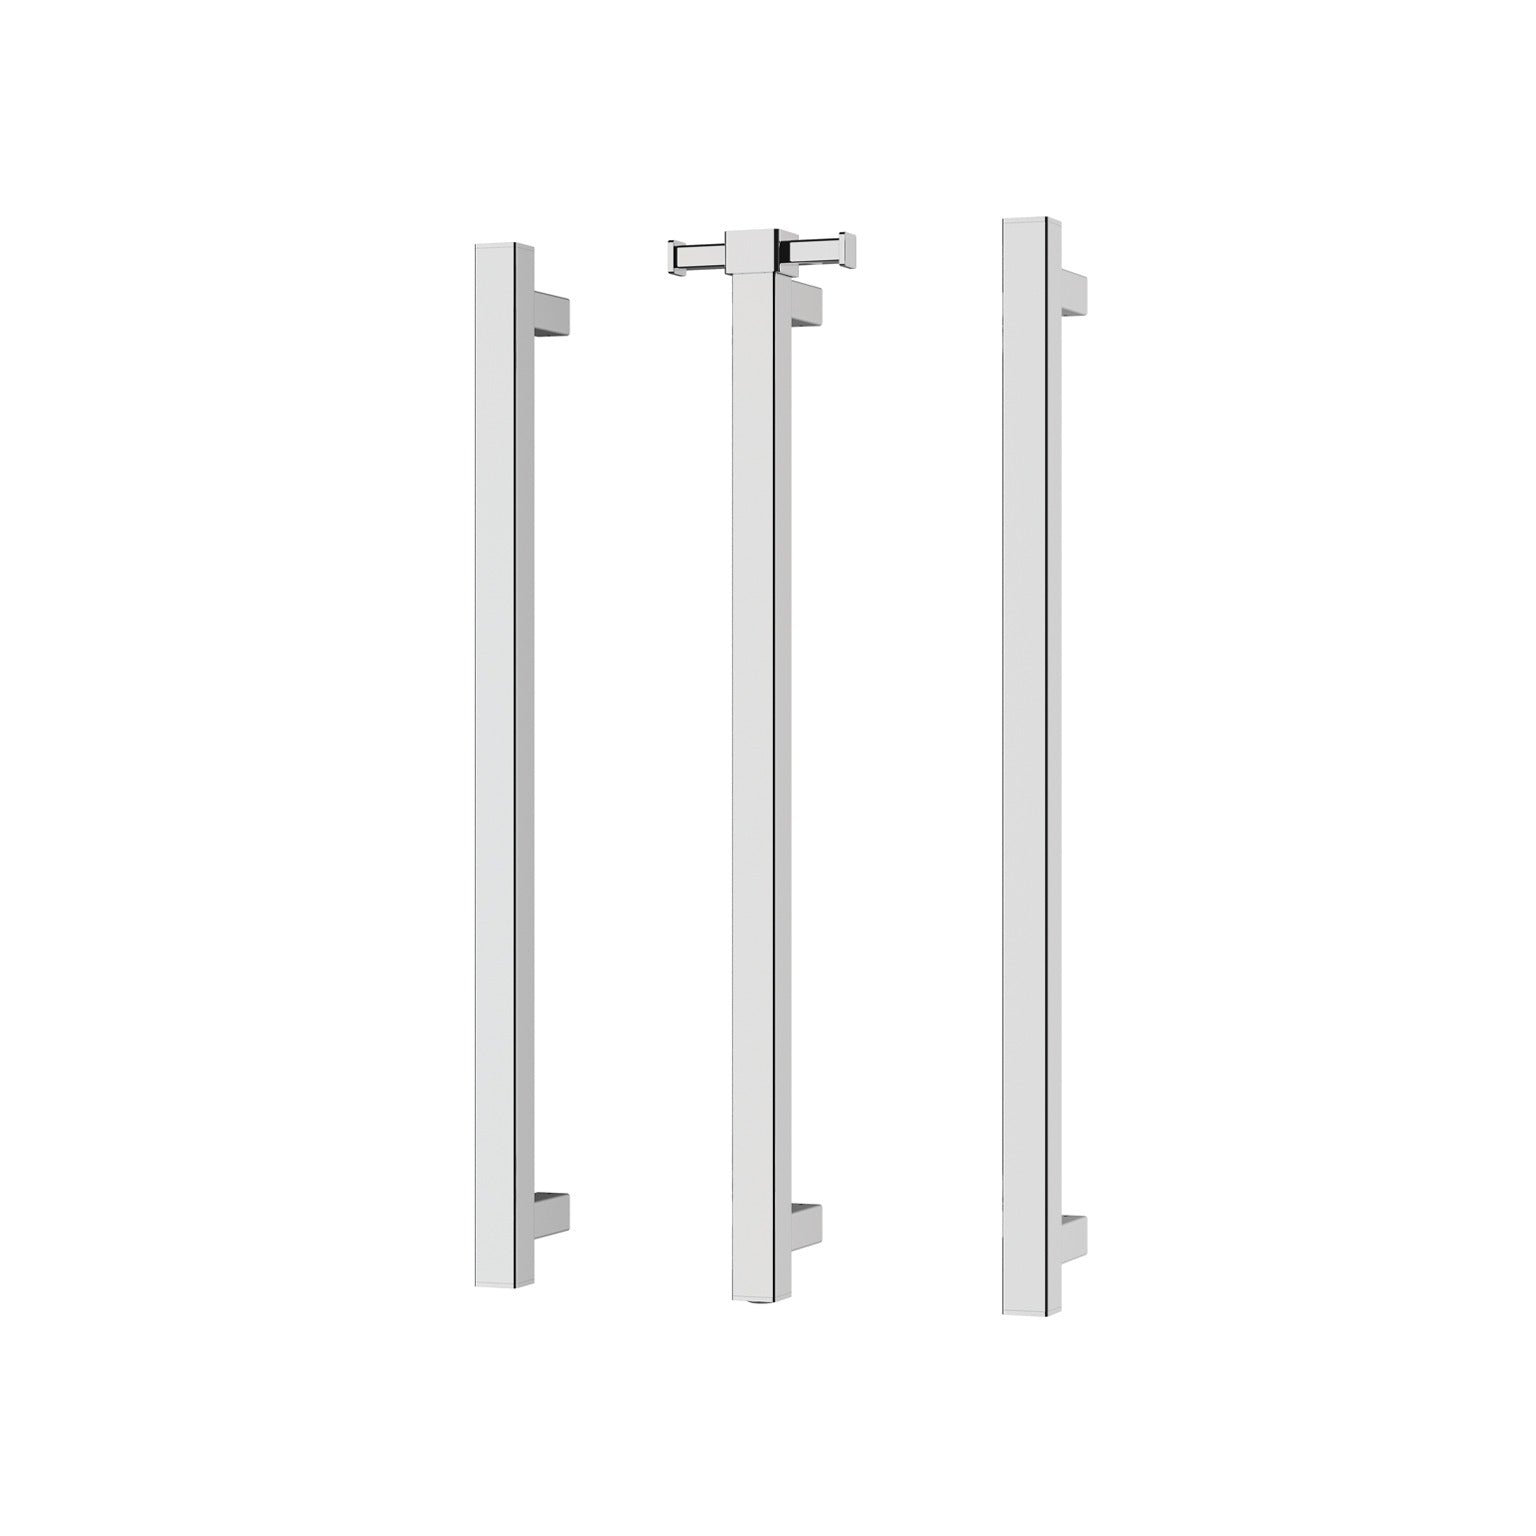 PHOENIX SQUARE TRIPLE HEATED TOWEL RAIL CHROME (AVAILABLE IN 600MM AND 800MM)